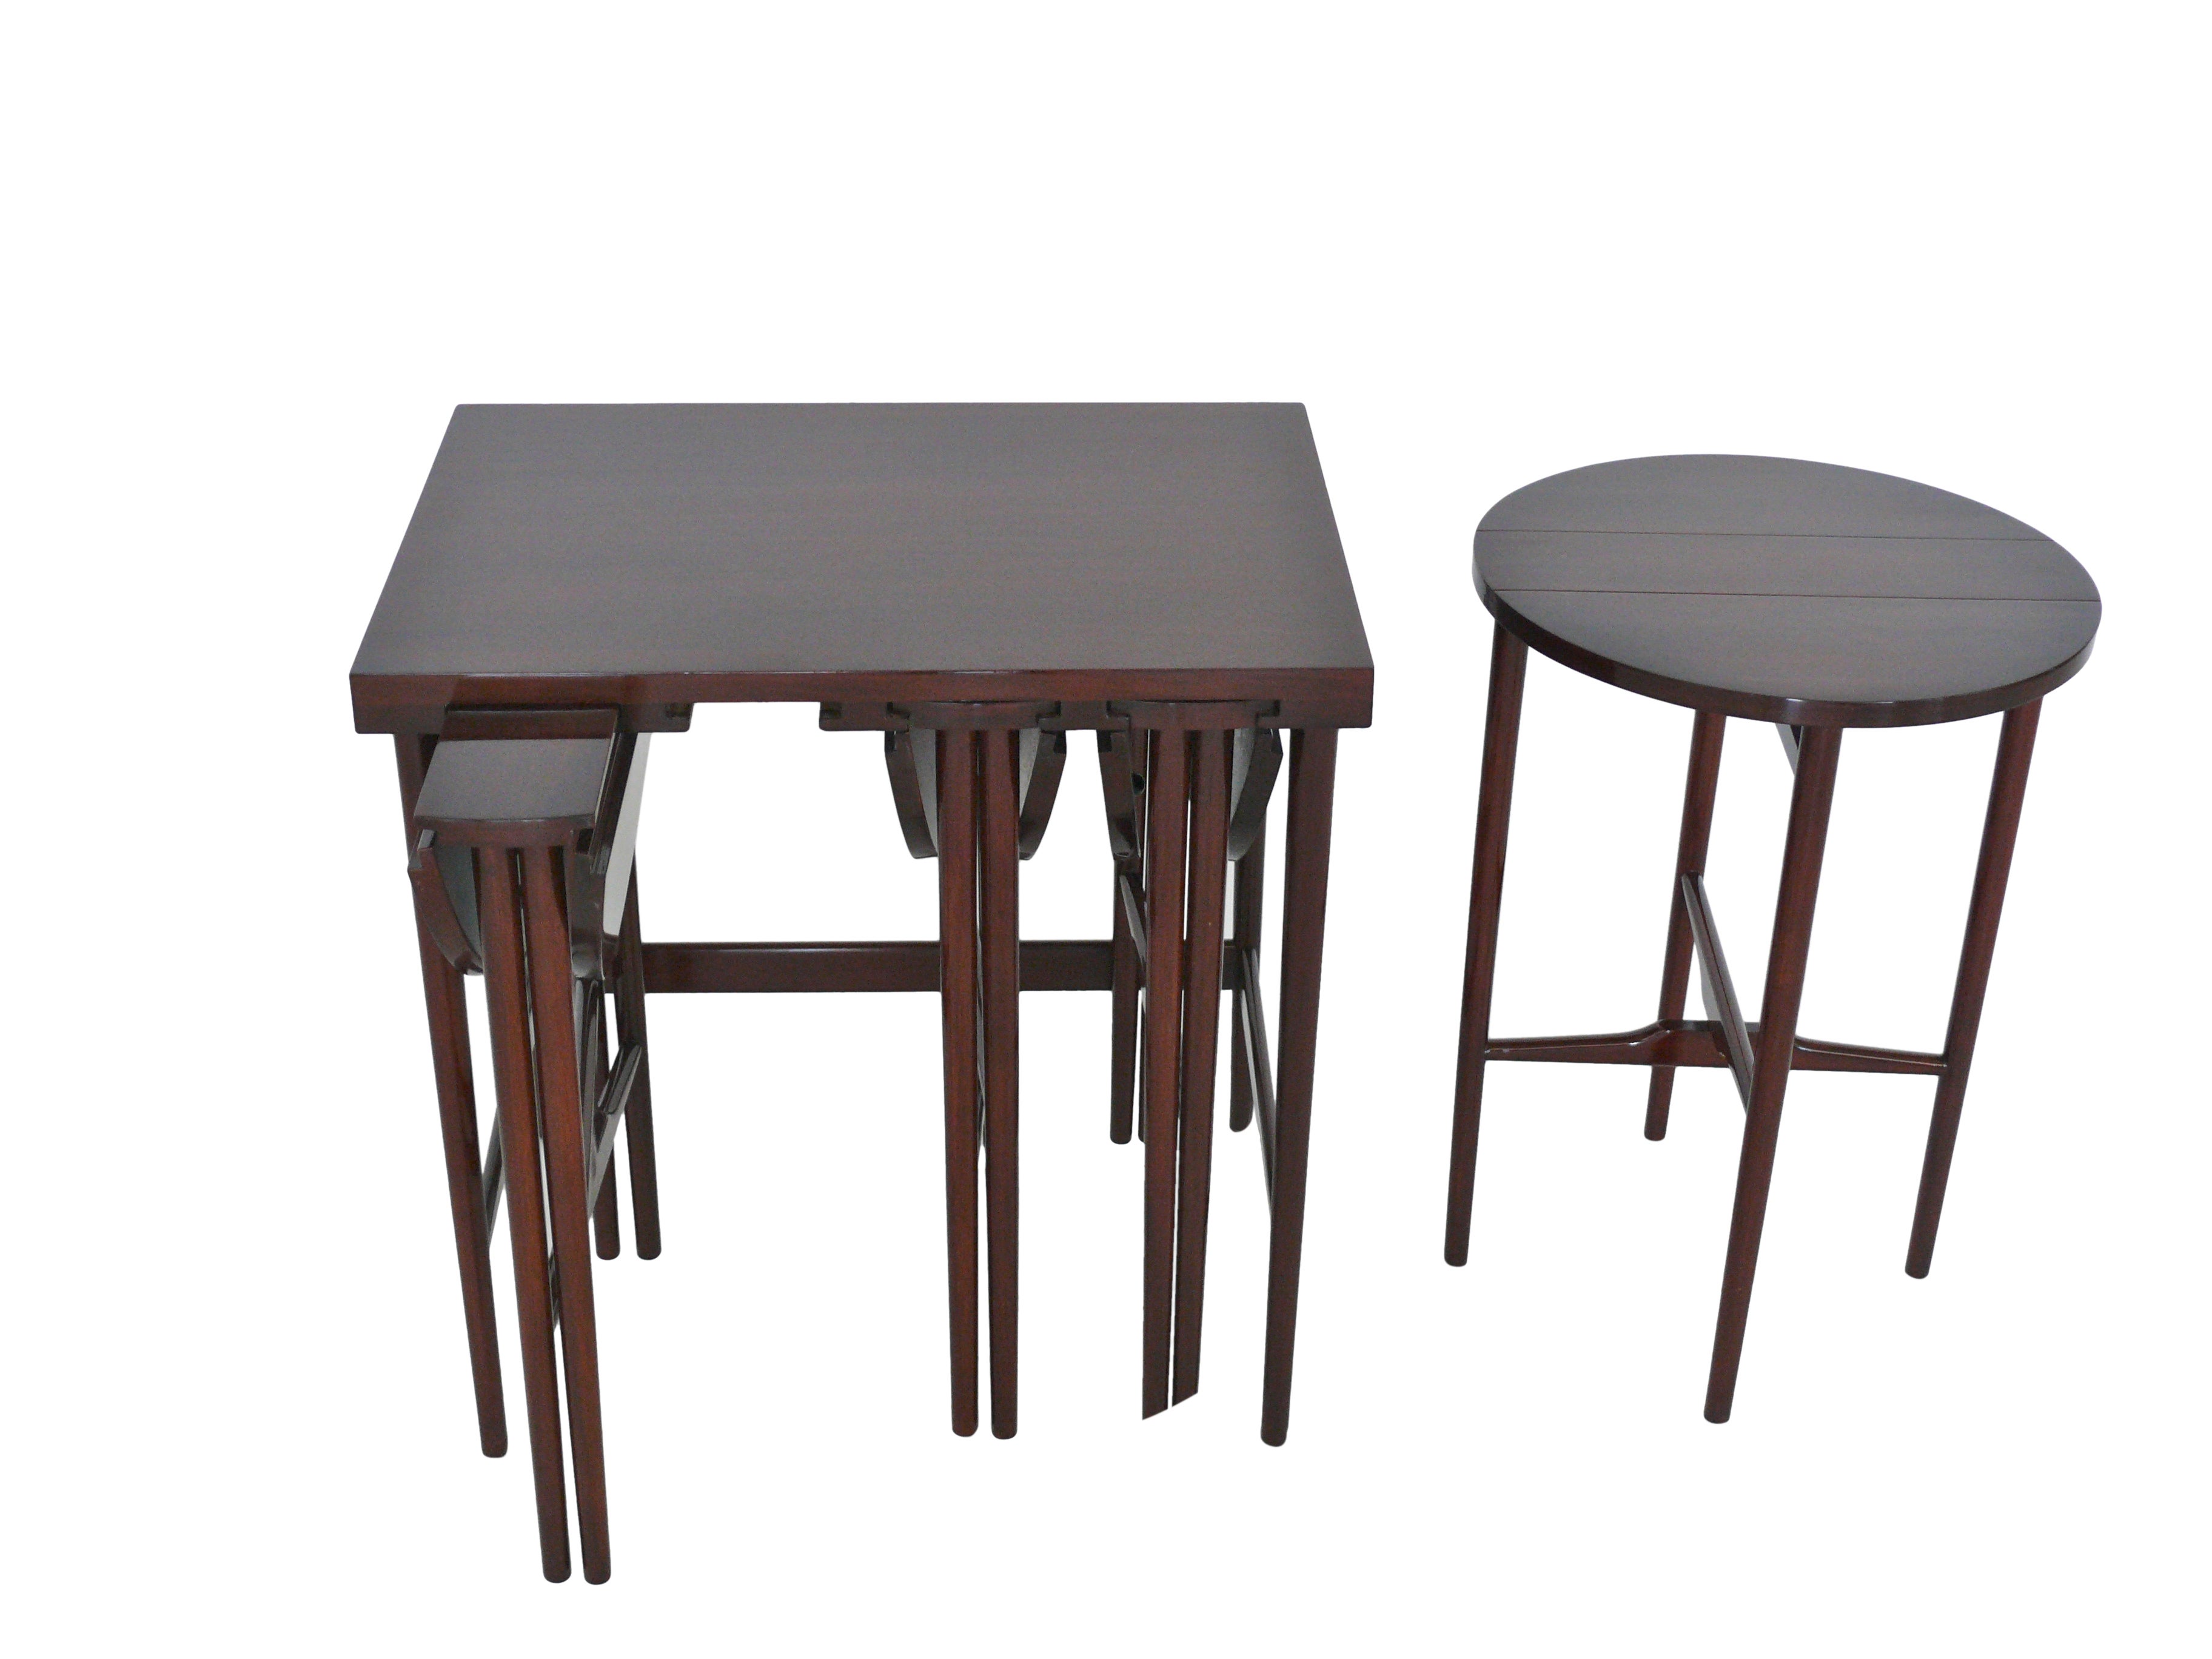 Walnut Nesting Tables by Bertha Schaeffer for Singer and Sons